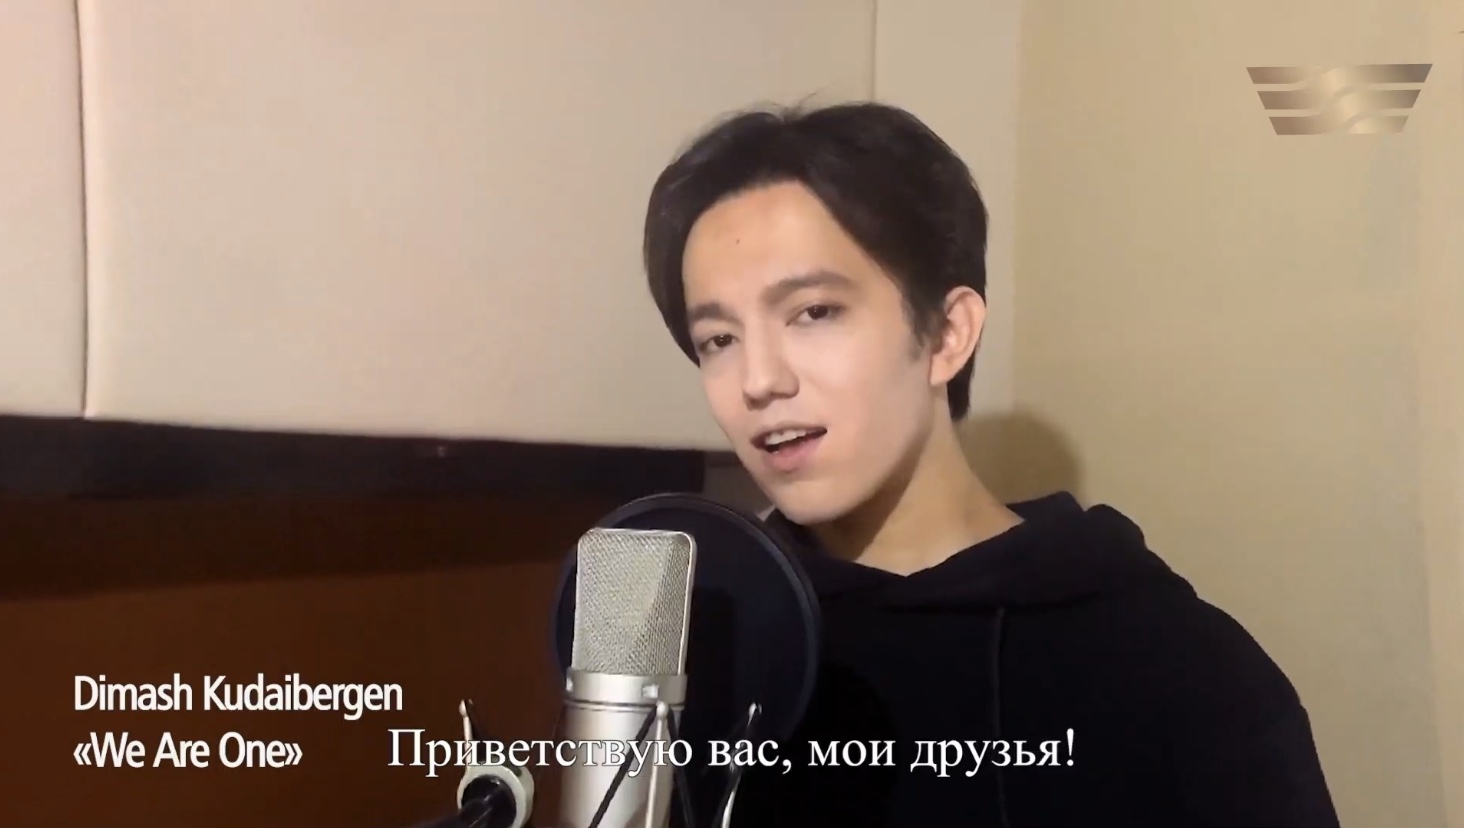 Dimash releases music video over pandemic